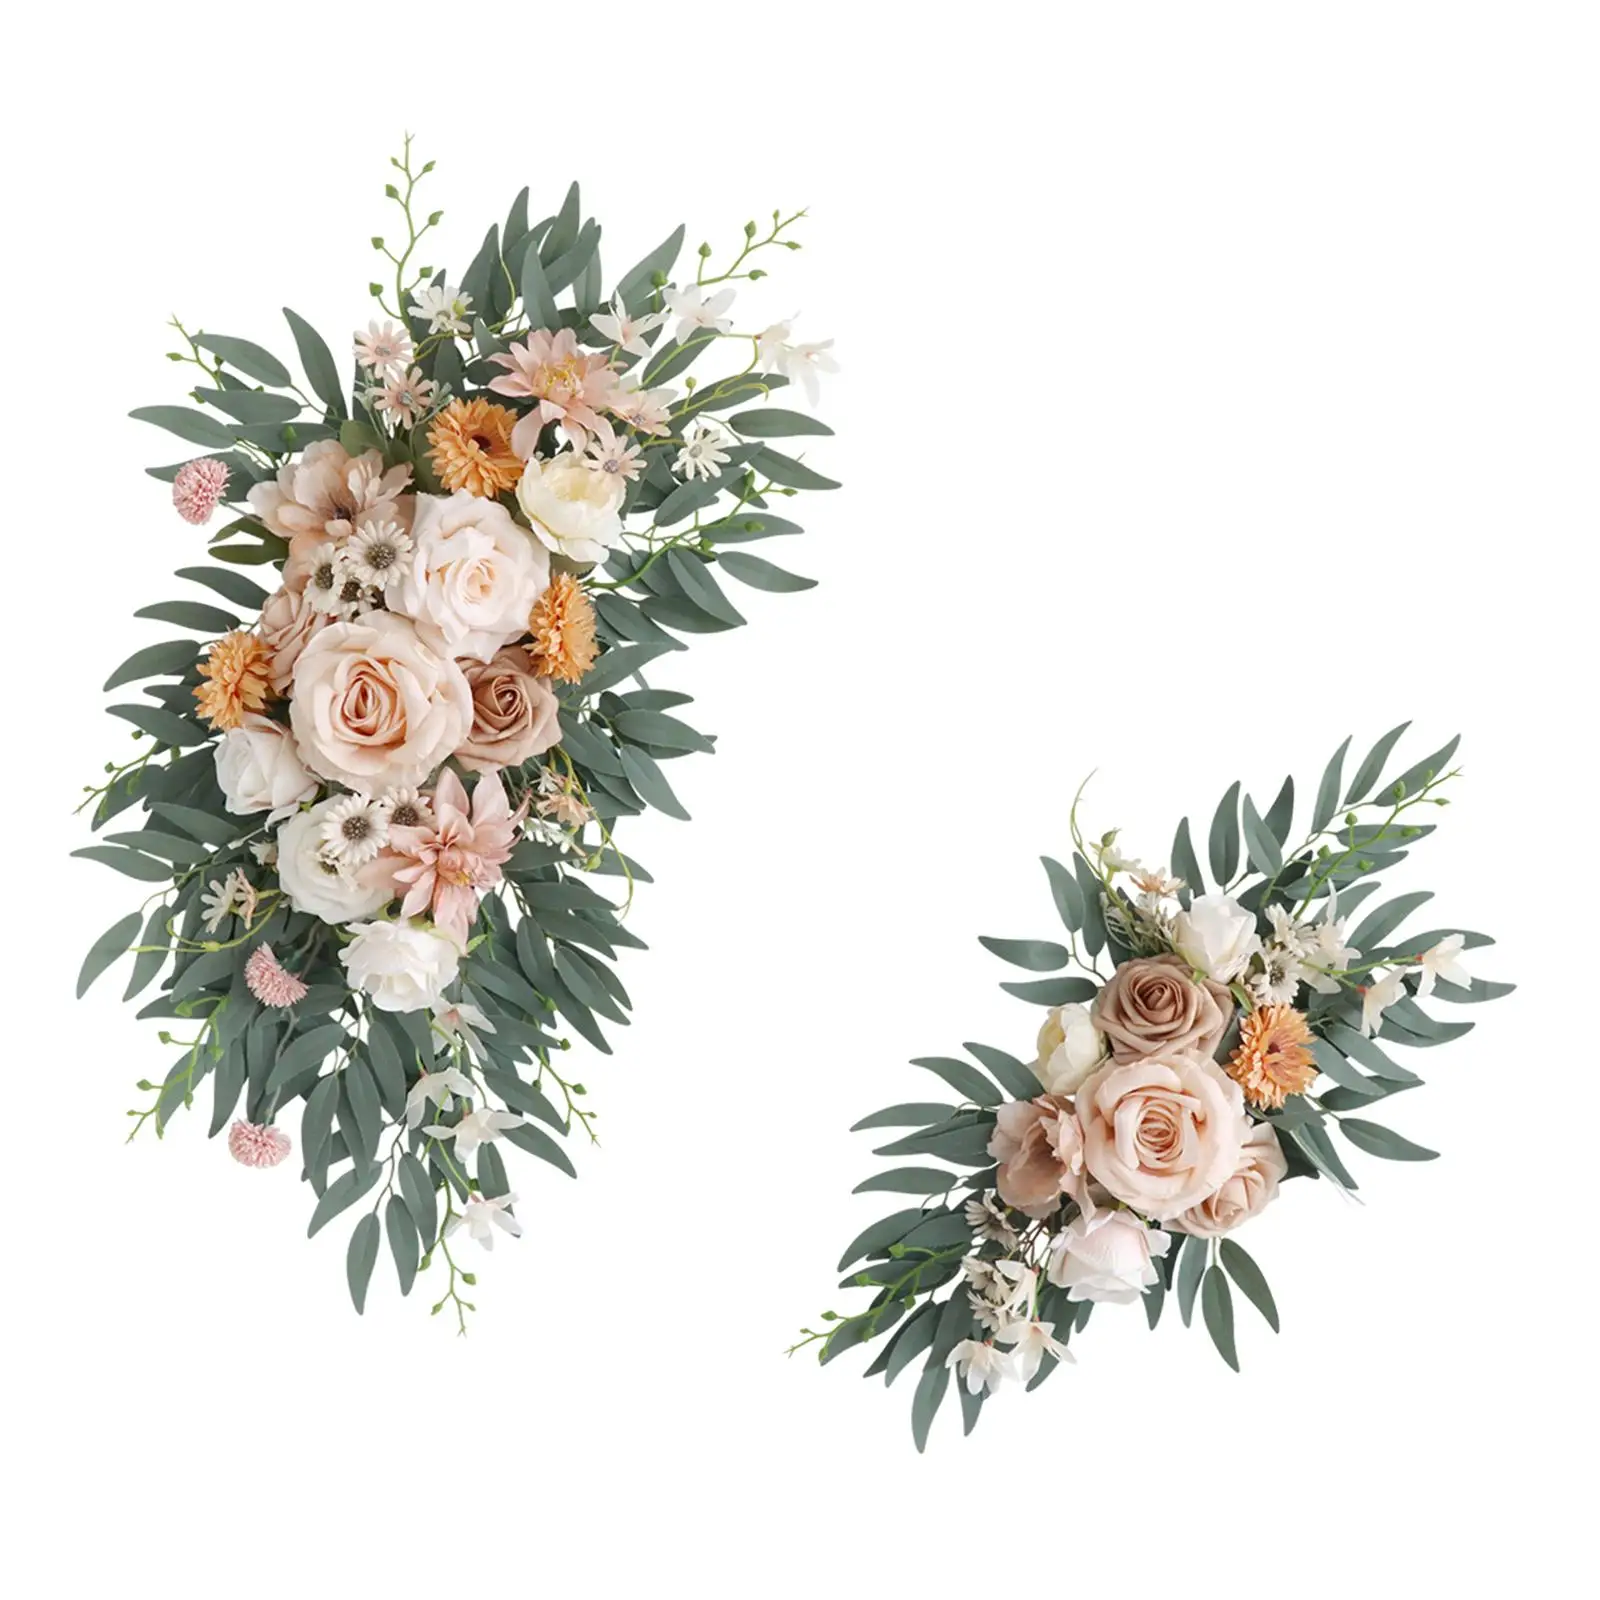 2x Wedding Arch Flower Silk Flowers Eucalyptus Leaves Artificial Floral Swag for Wall Arbor Reception Ceremony Party